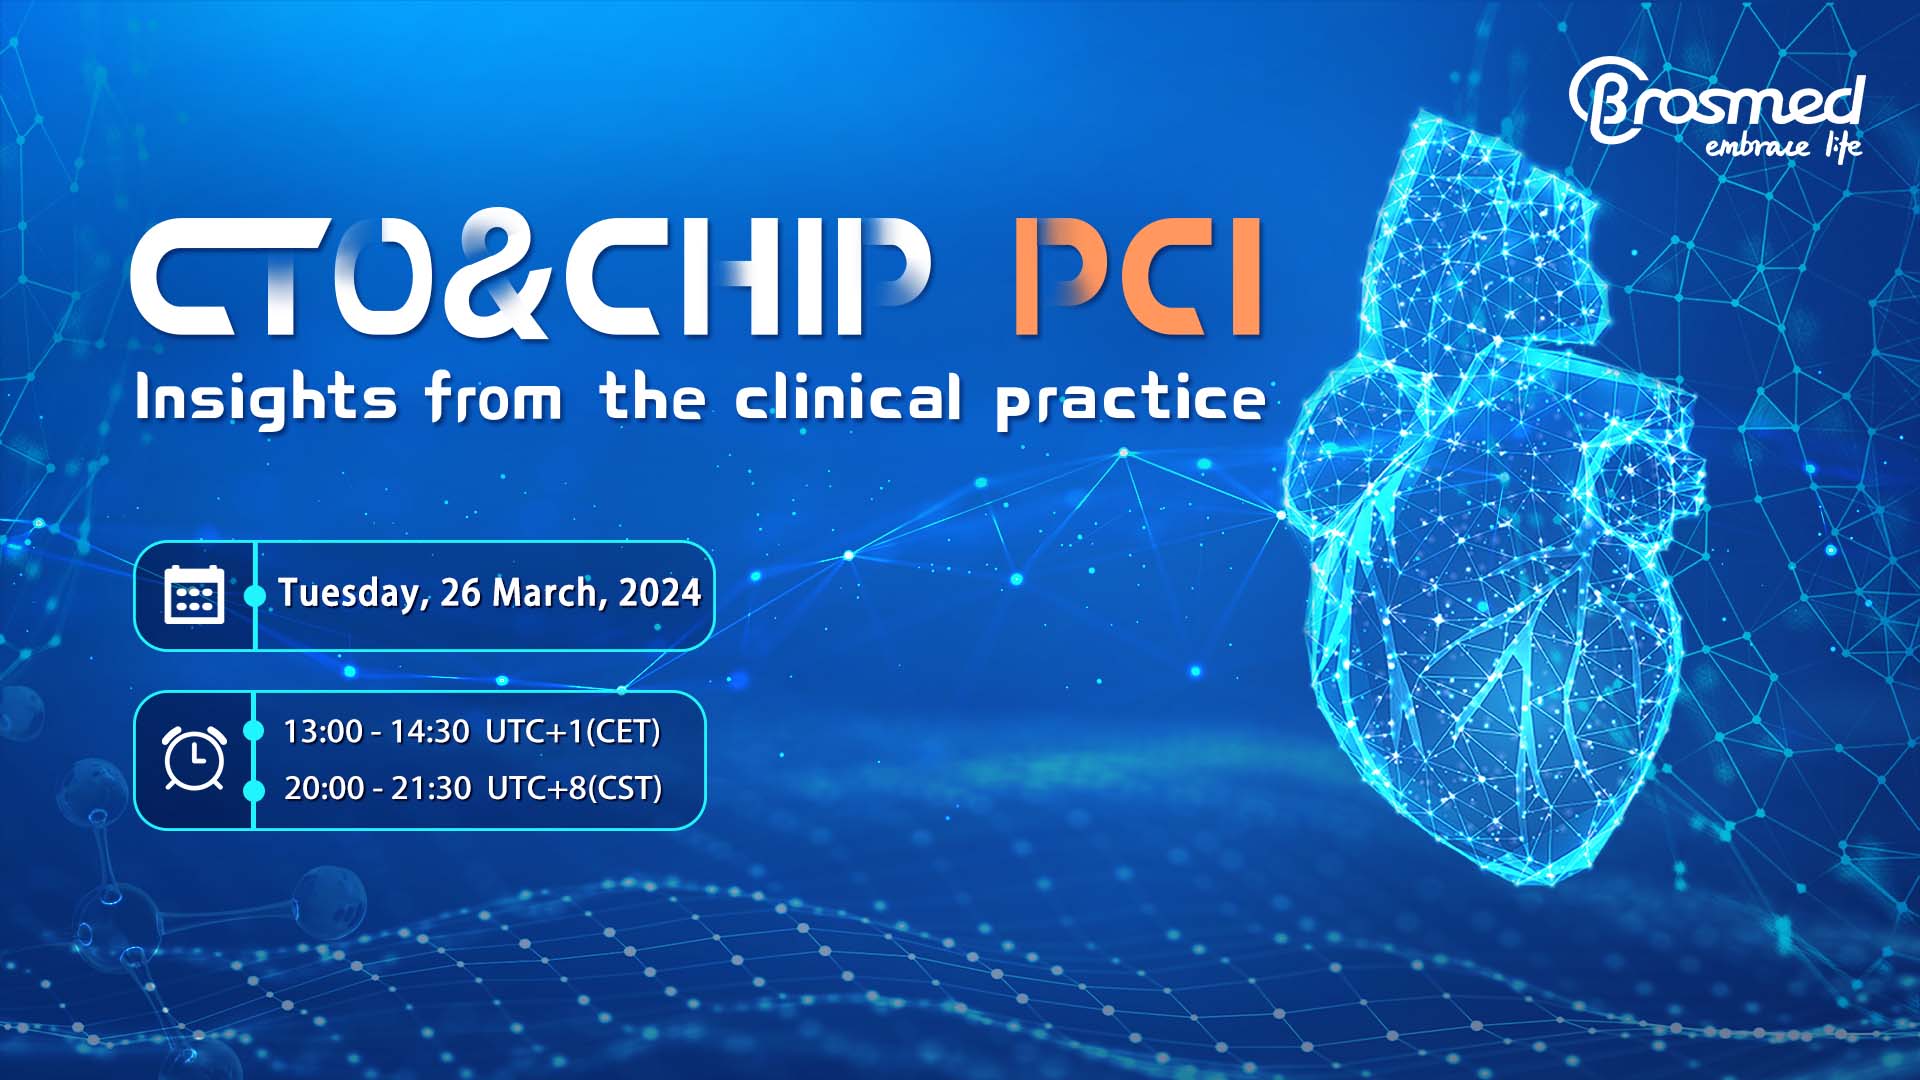 CTO&CHIP PCI – Insights from the clinical practice